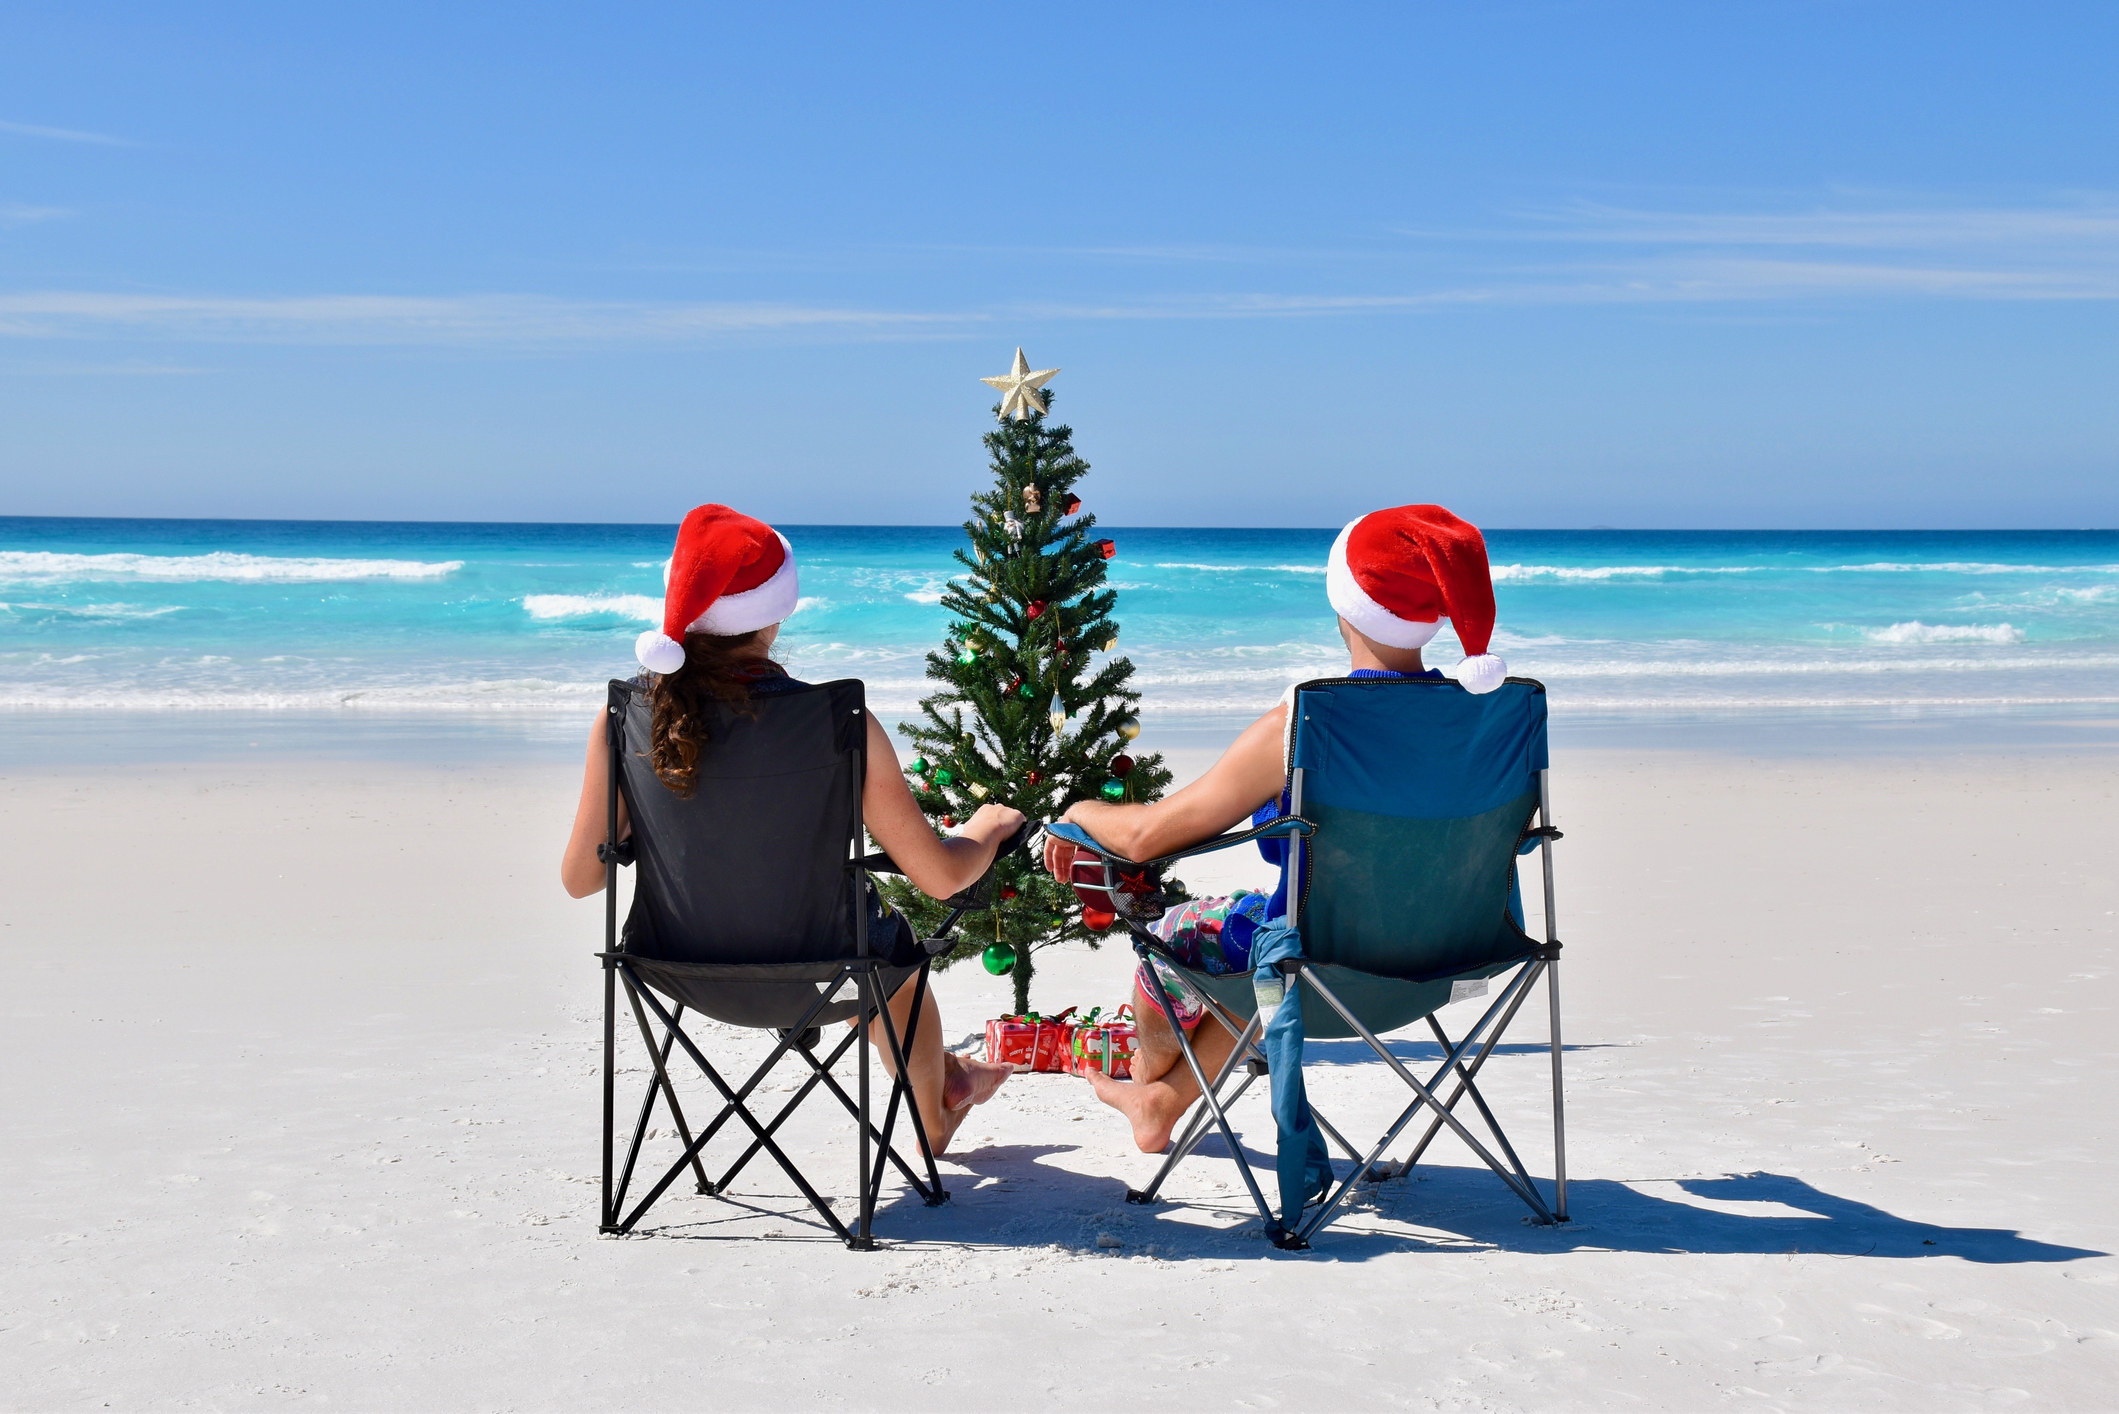 Two Australians on the beach in Christmas hats